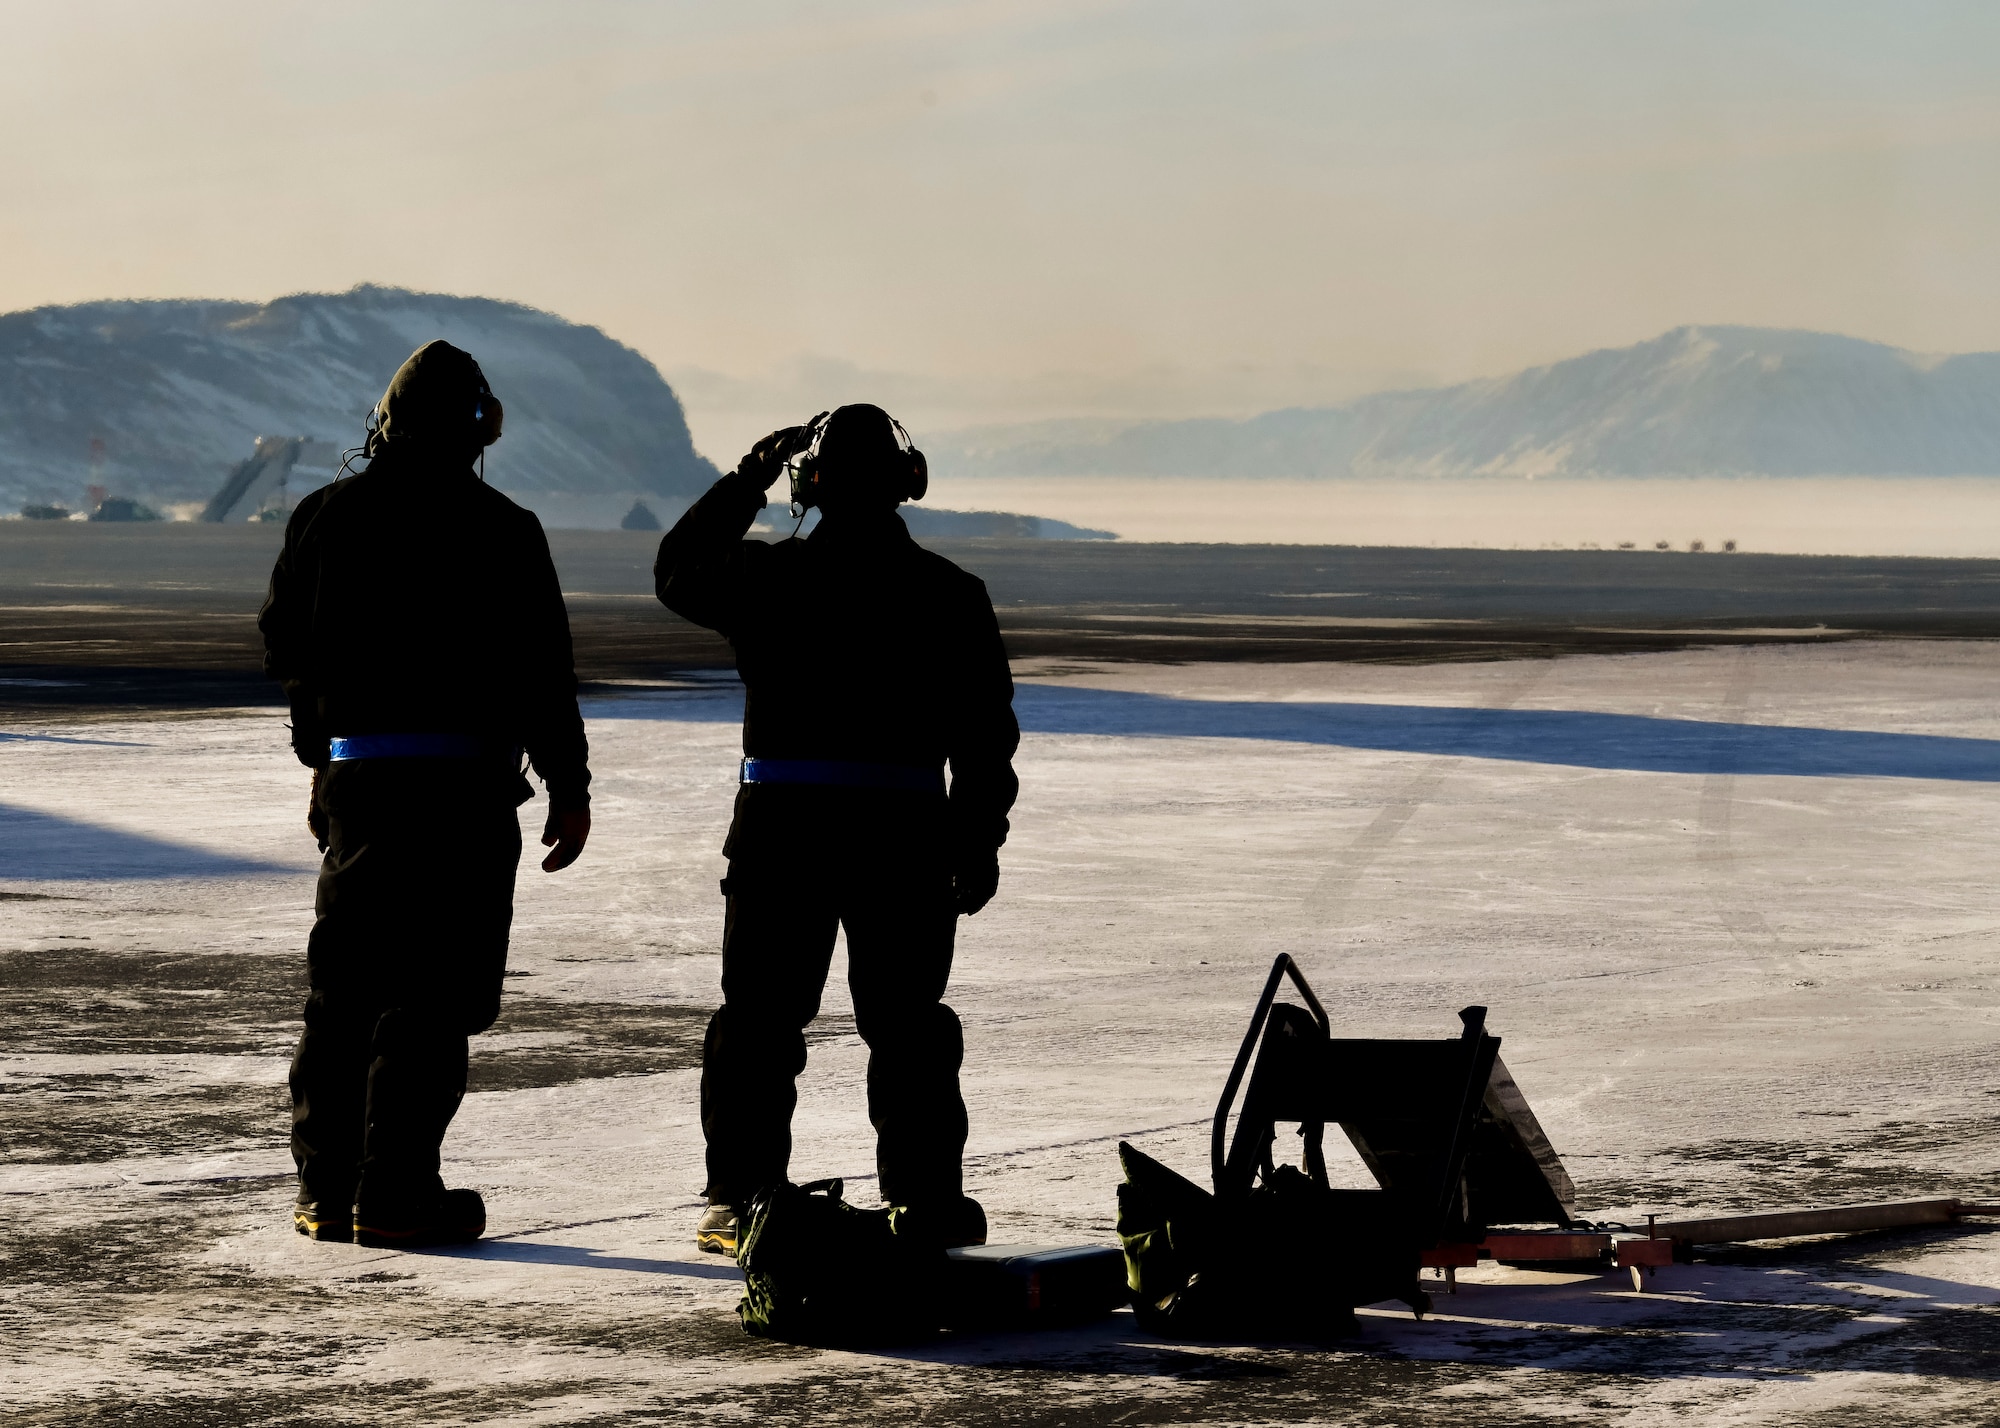 U.S. Air Force Airmen from the 148th Maintenance Squadron await the arrival of F-16s at Thule Air Base, Greenland during North American Aerospace Defense Command’s Arctic air defense exercise, Amalgam Dart 21-2, March 22, 2021.